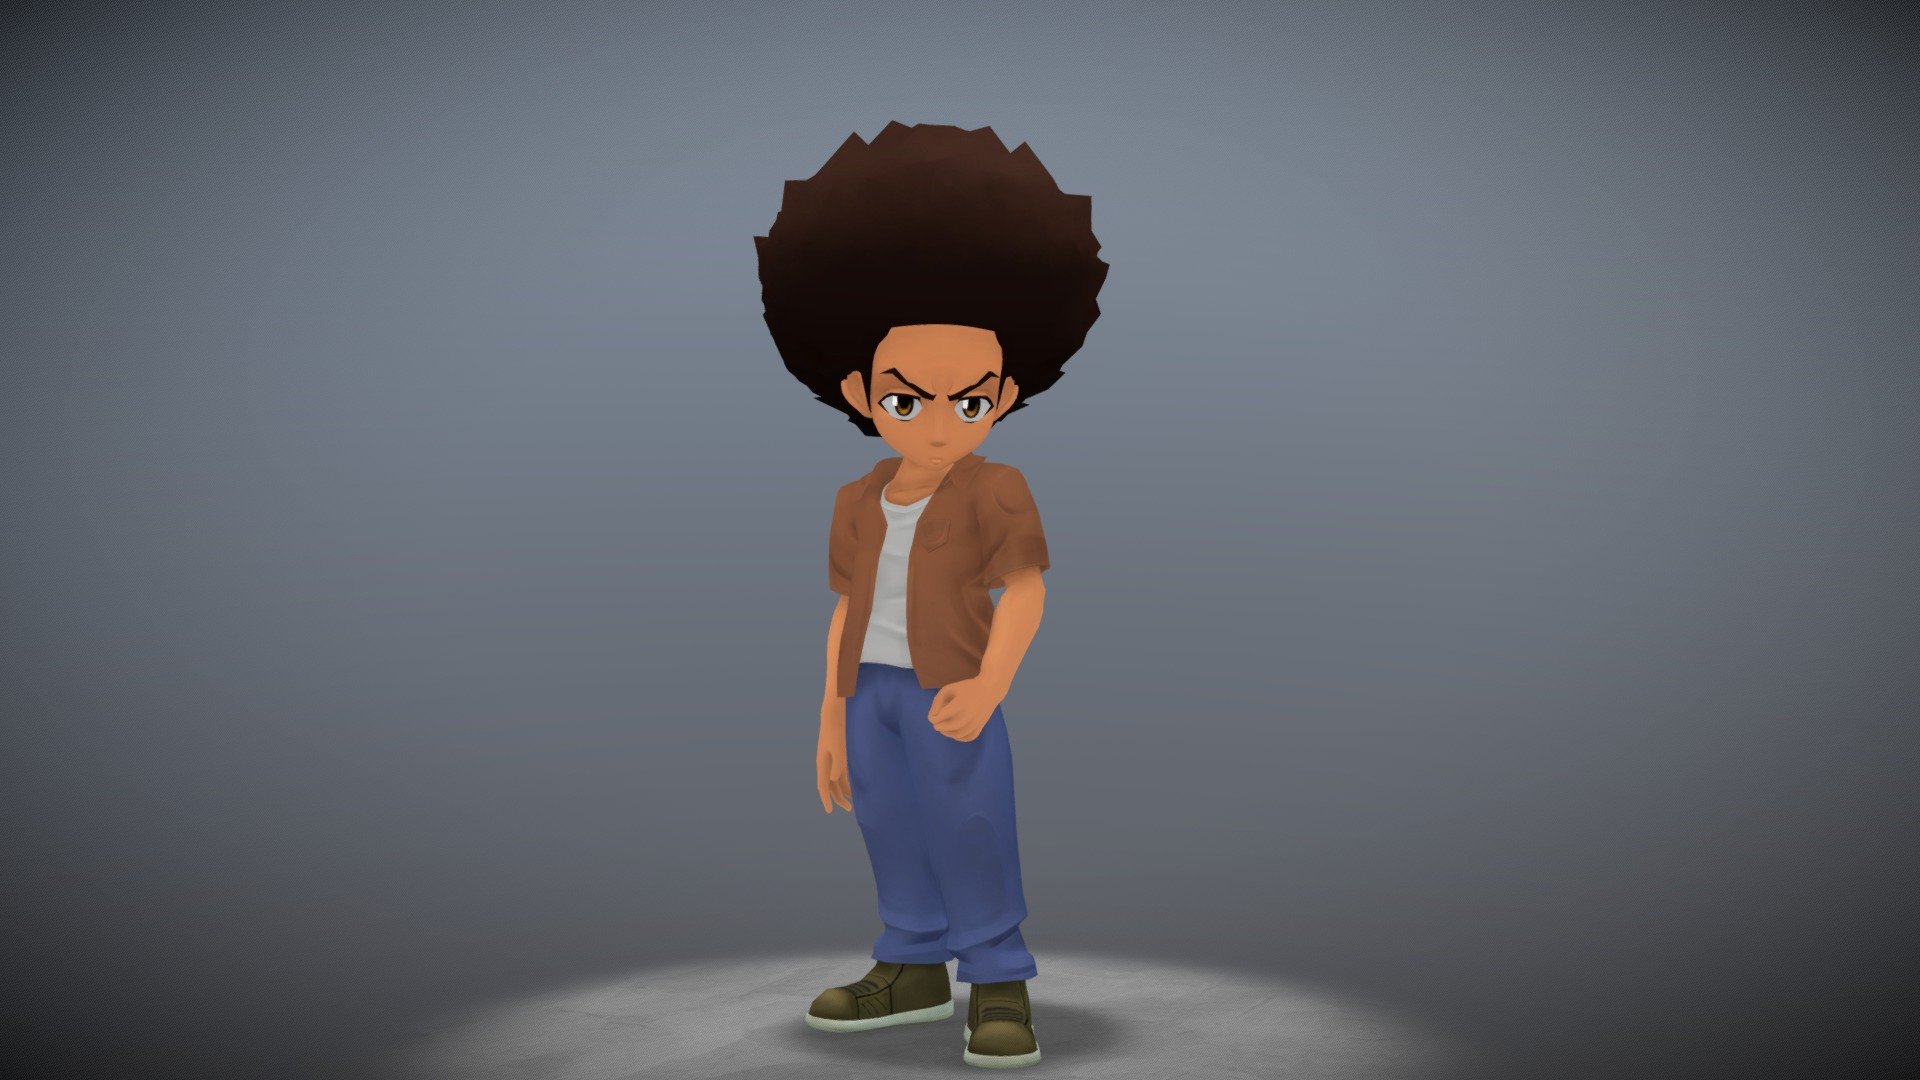 Huey freeman from the show boondocks.
This model is up to be download on other sites 3d model